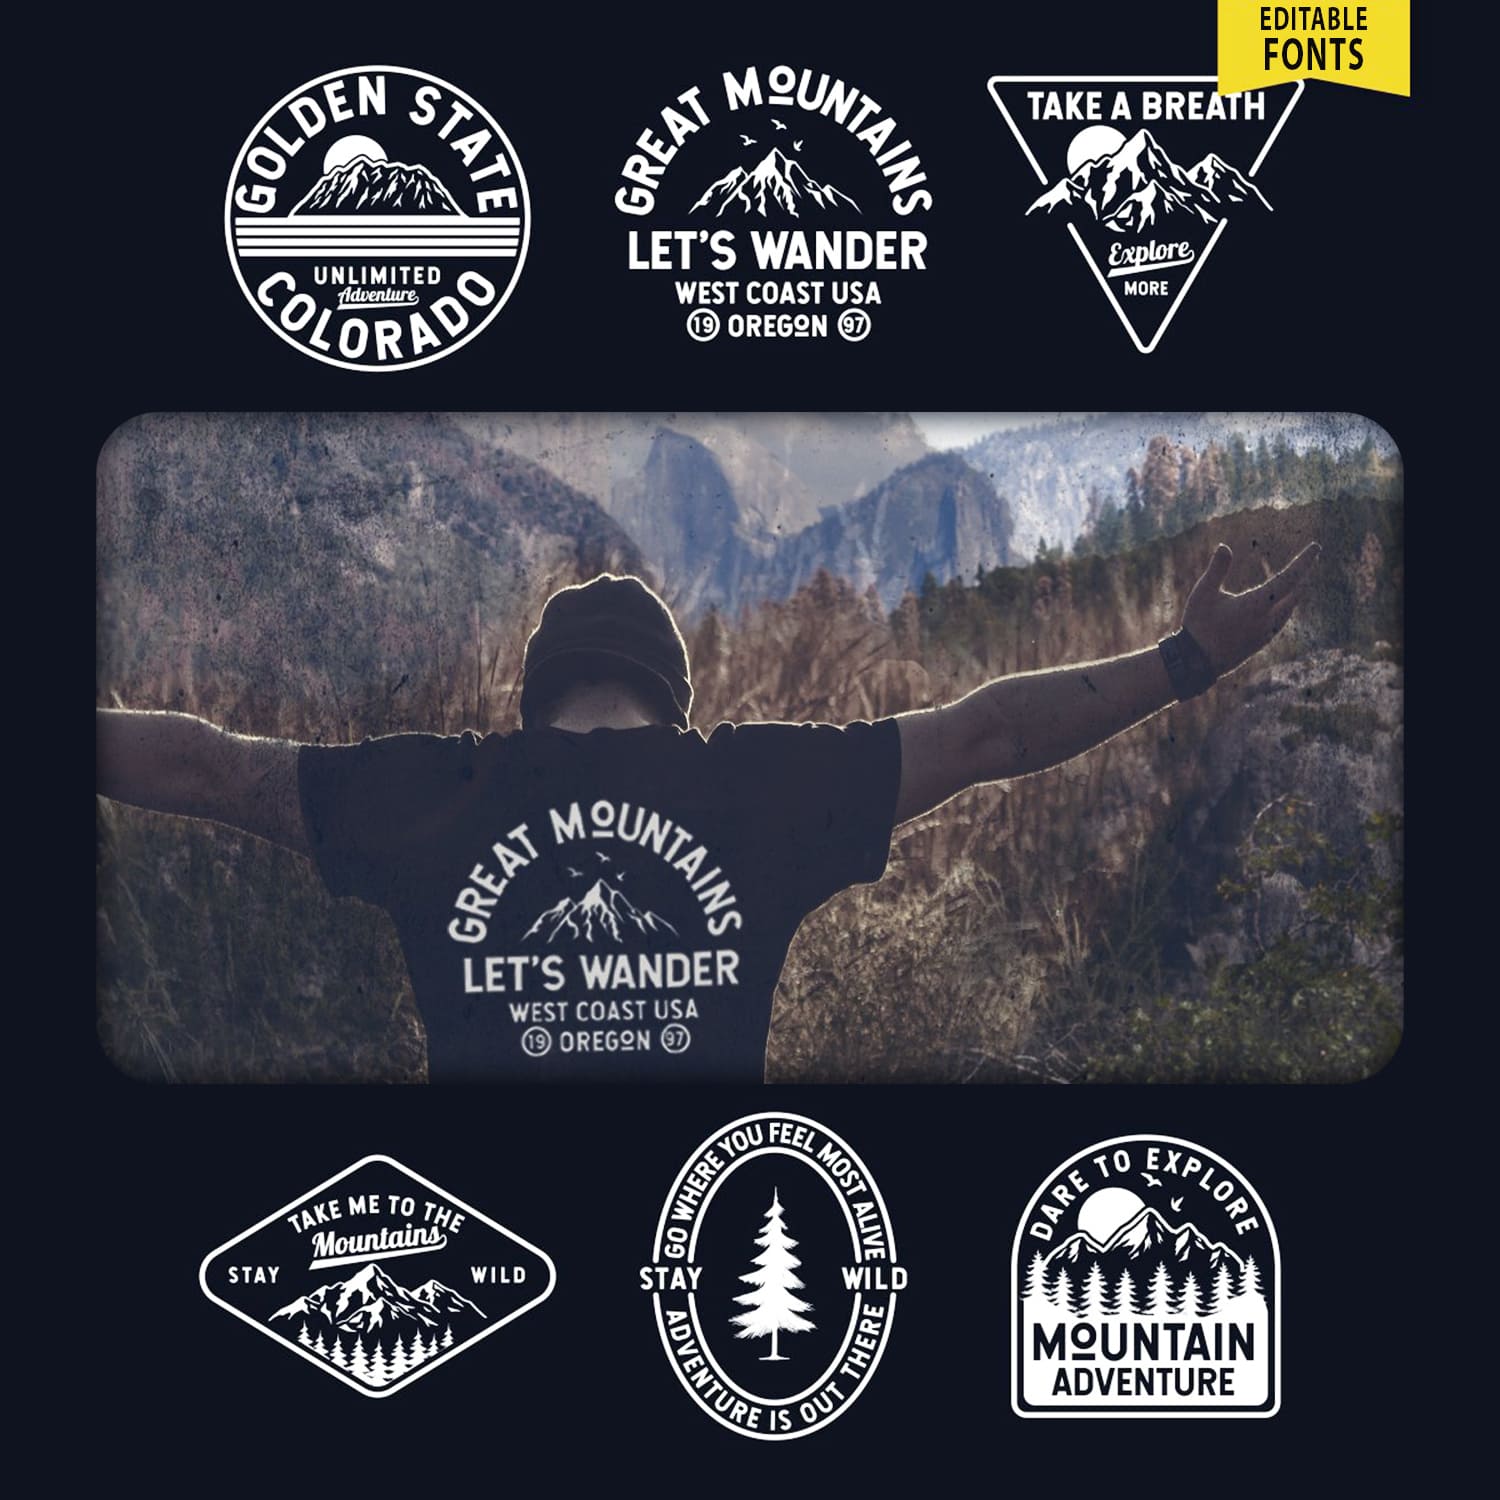 Vector Mountain Badges cover image.